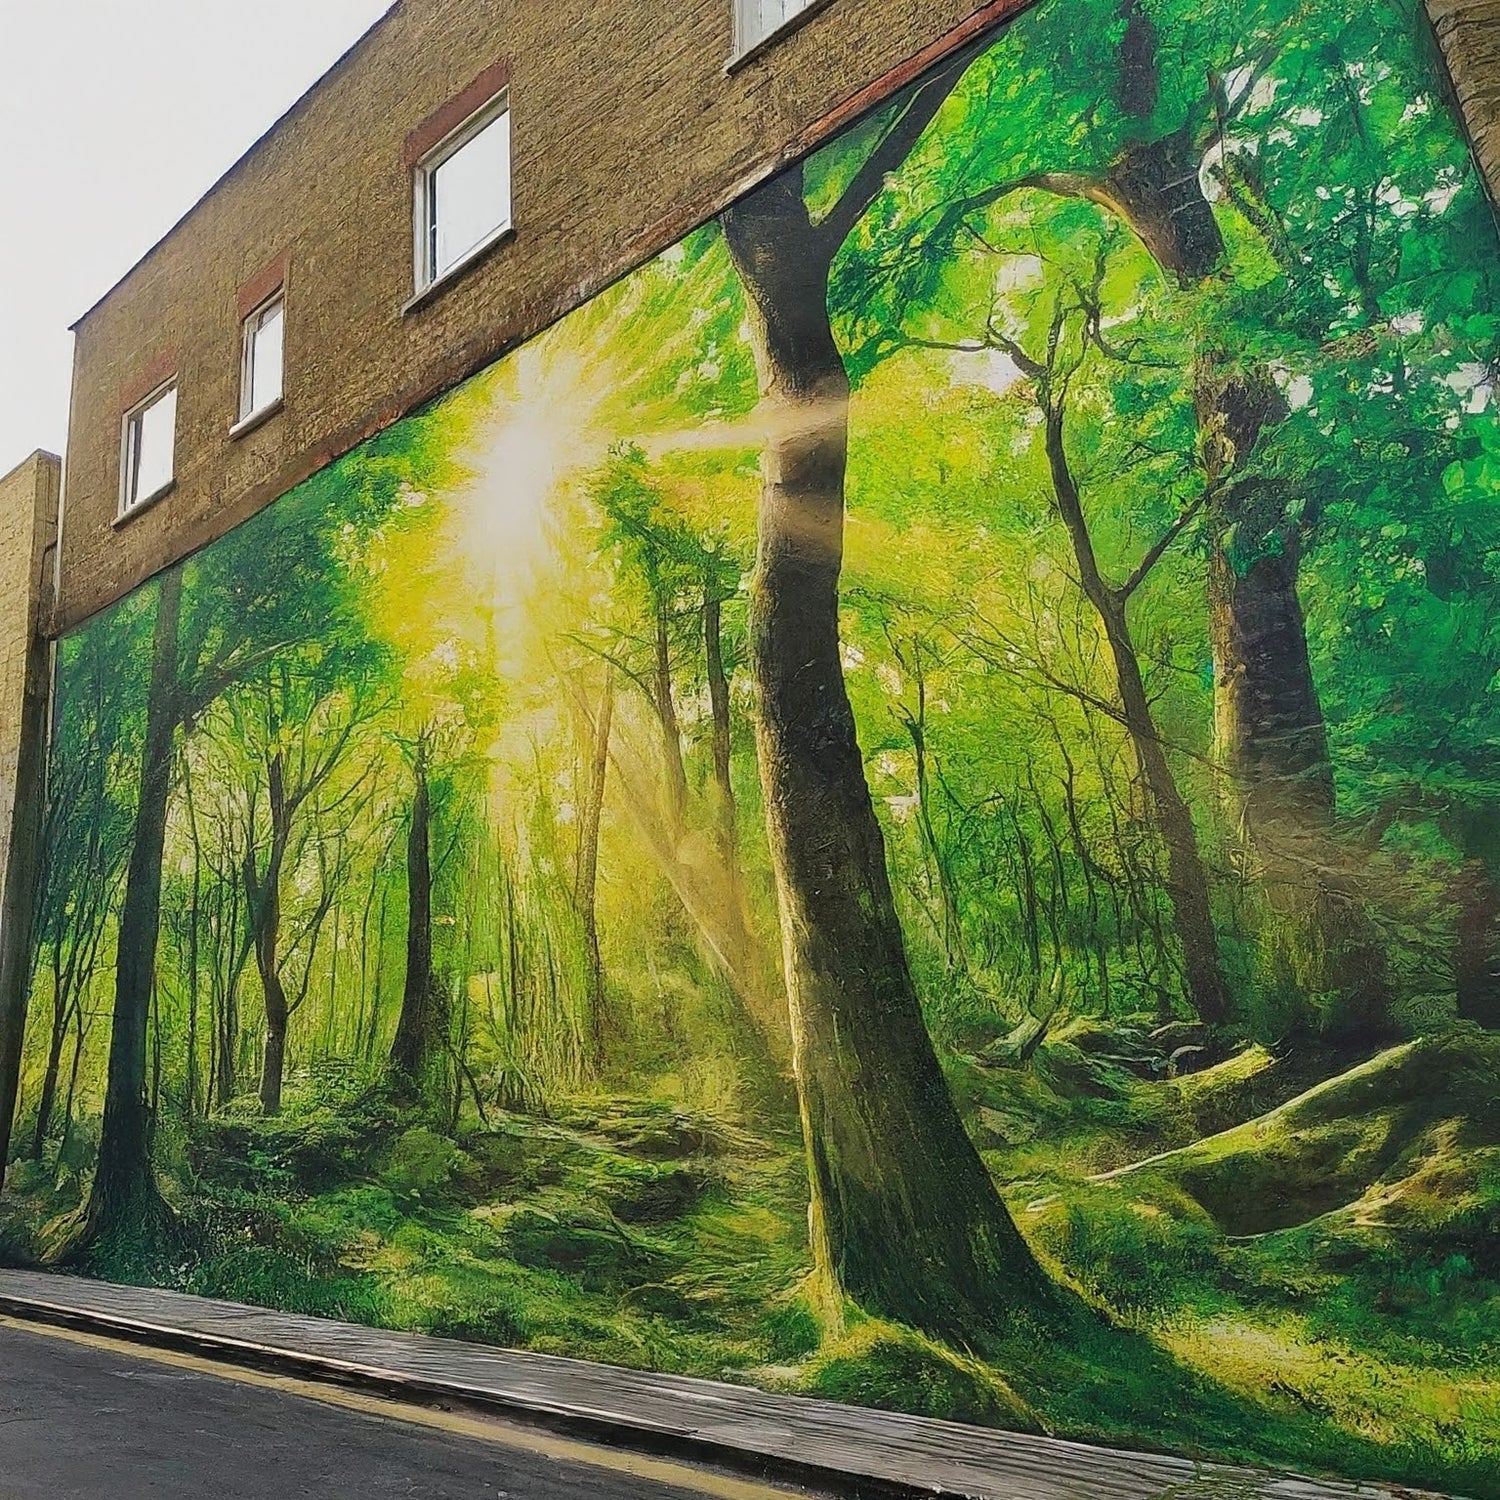 a large mural in the street of London, an image generated by Google's AI